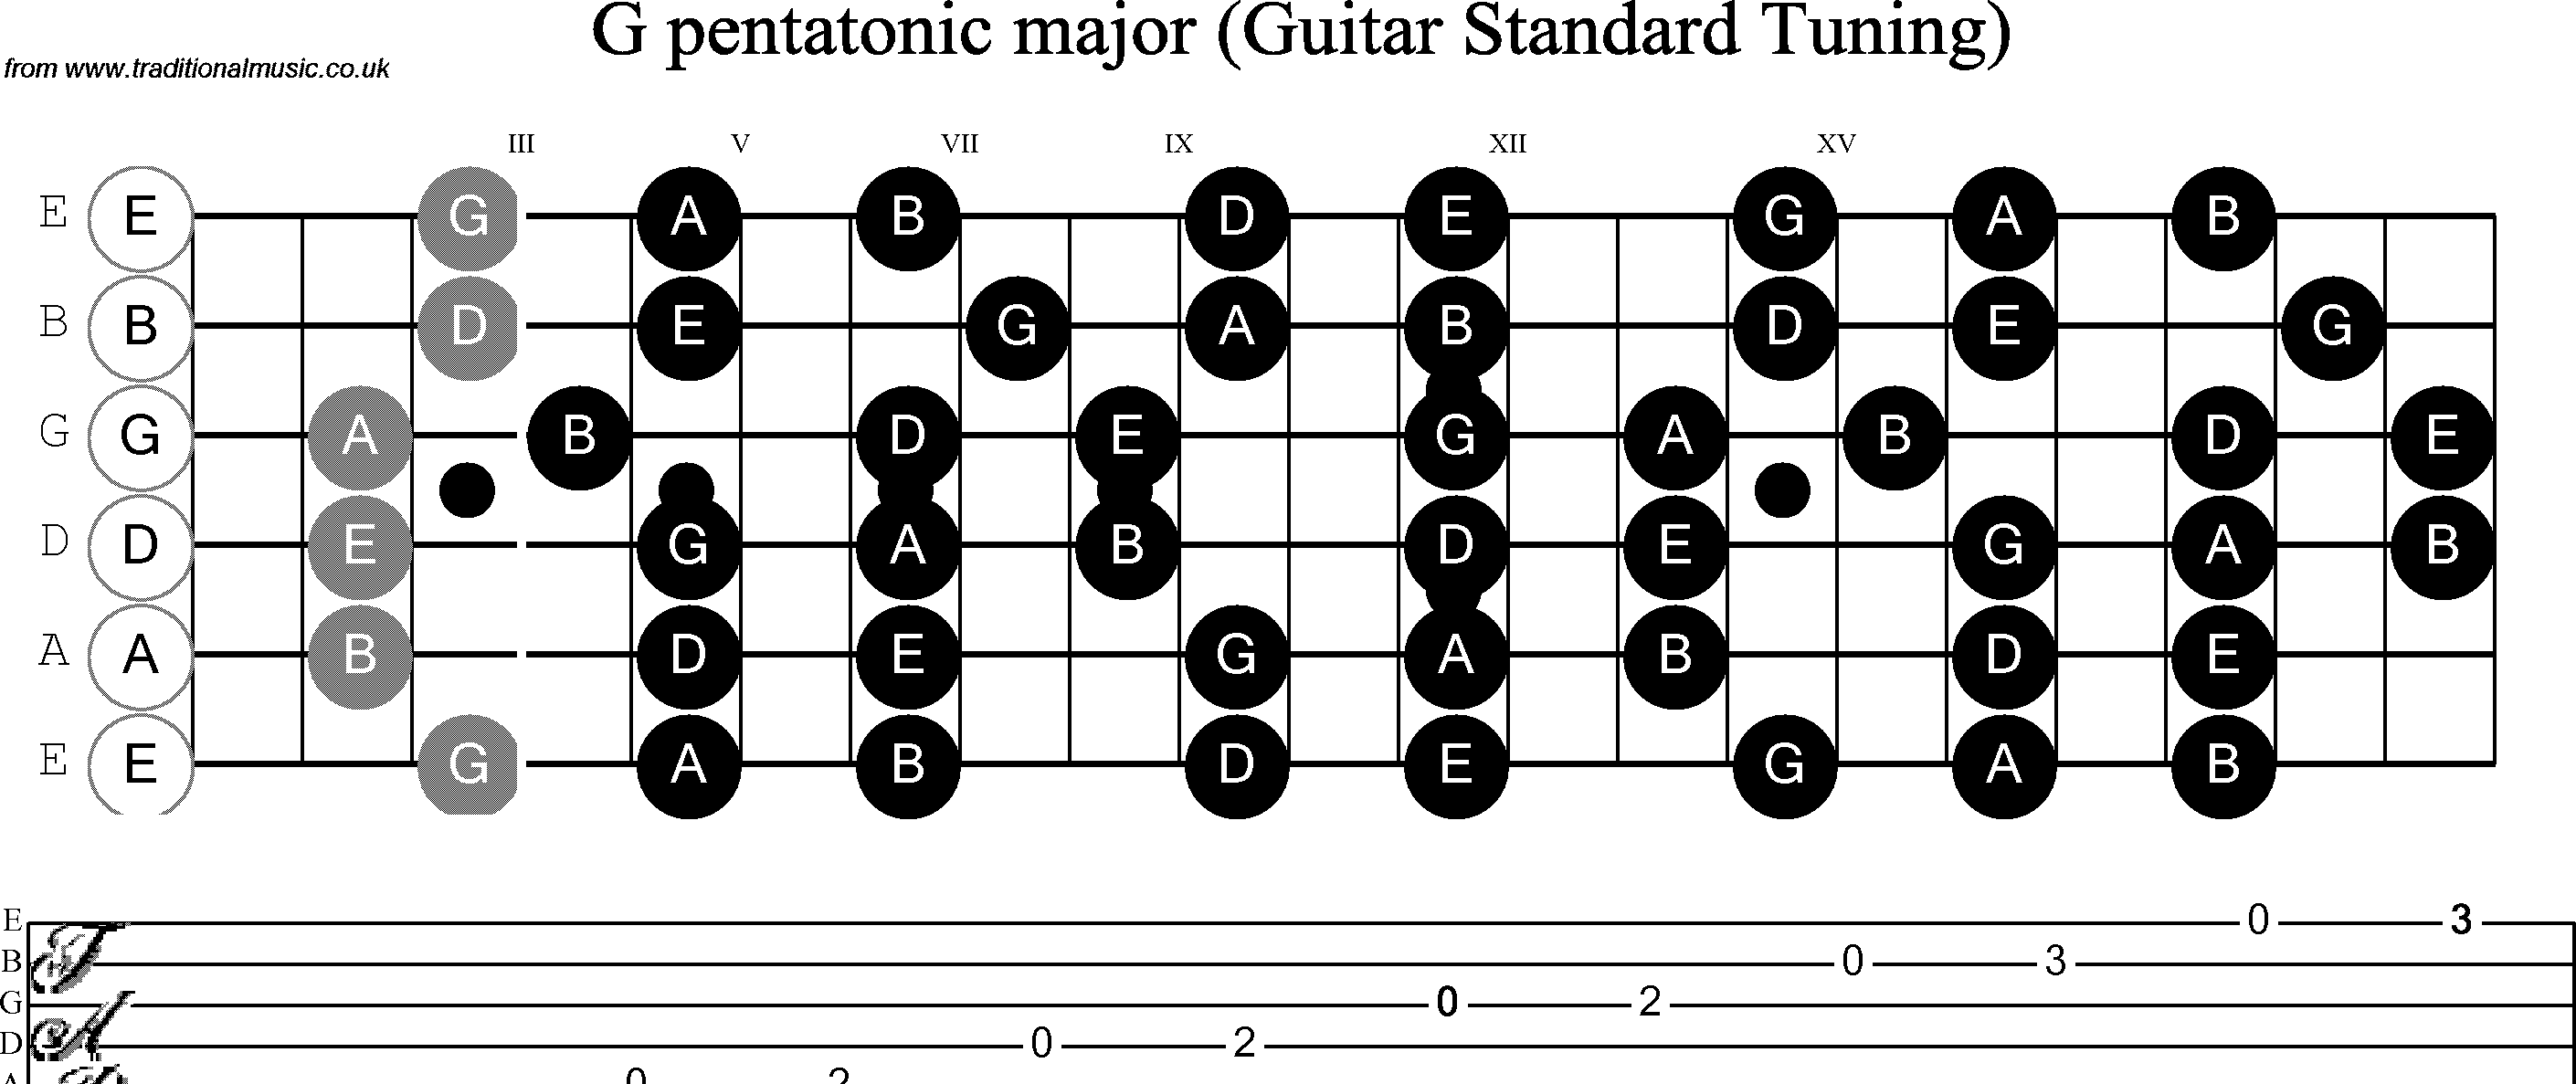 Scale, stave and neck diagram for Guitar: G Pentatonic